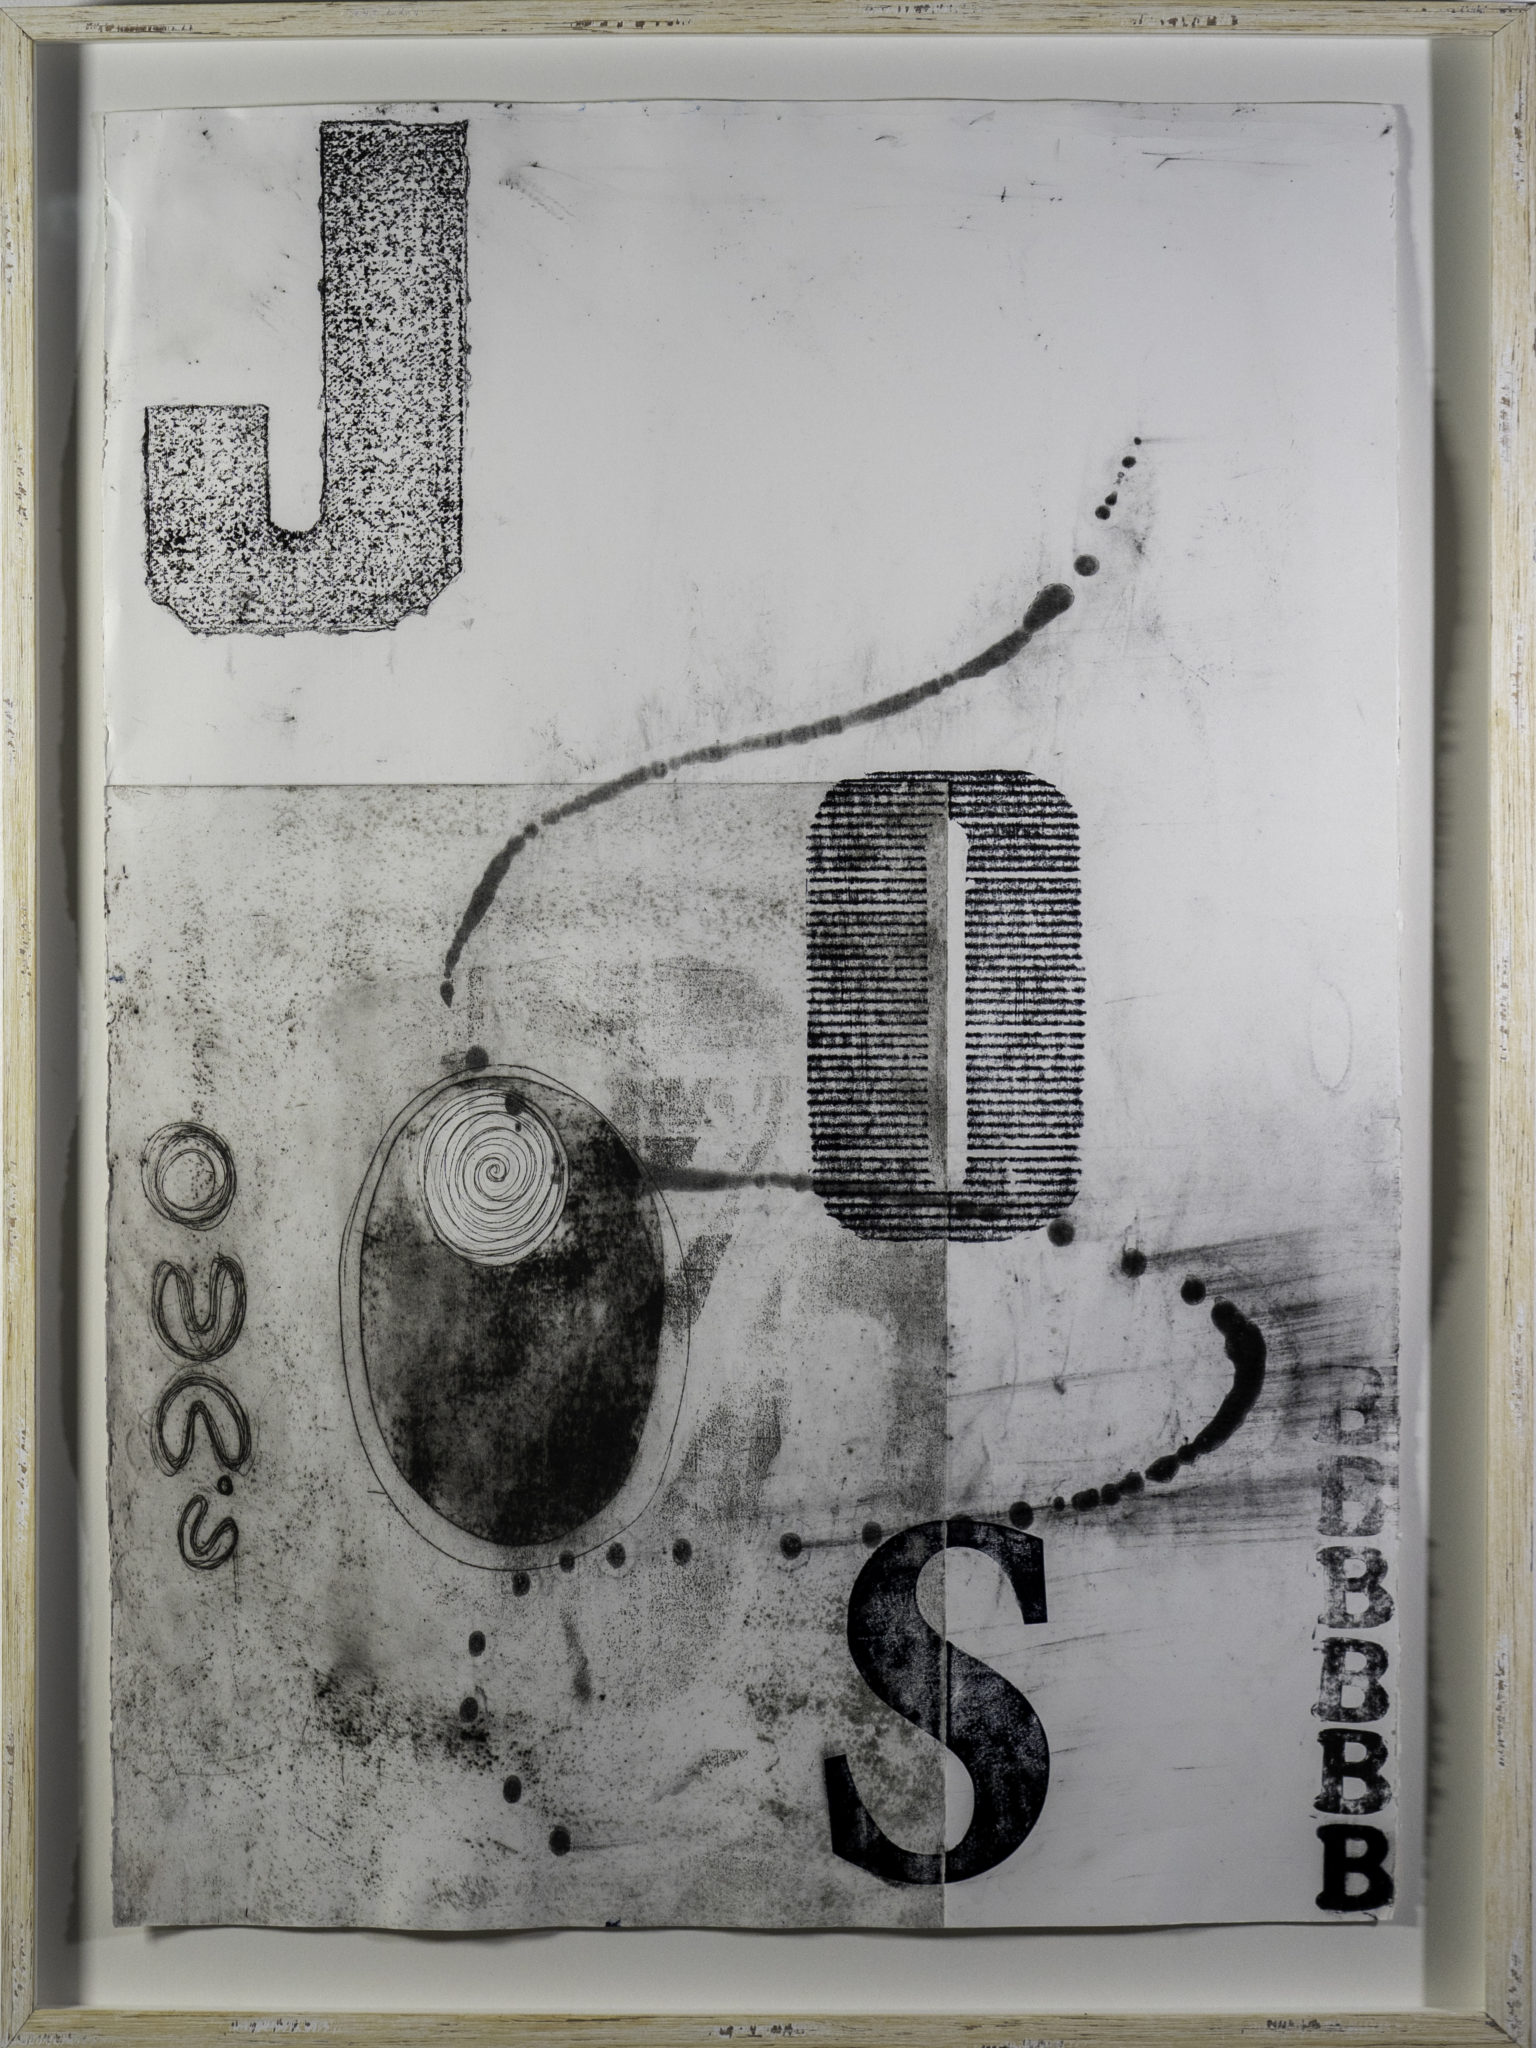 Patrice Muthaymiles Mahoney, Jobs, Policy and LOST, 2014, Etching and ink on paper, Triptych, 70 x 99 cm each, Collection of Federation University.